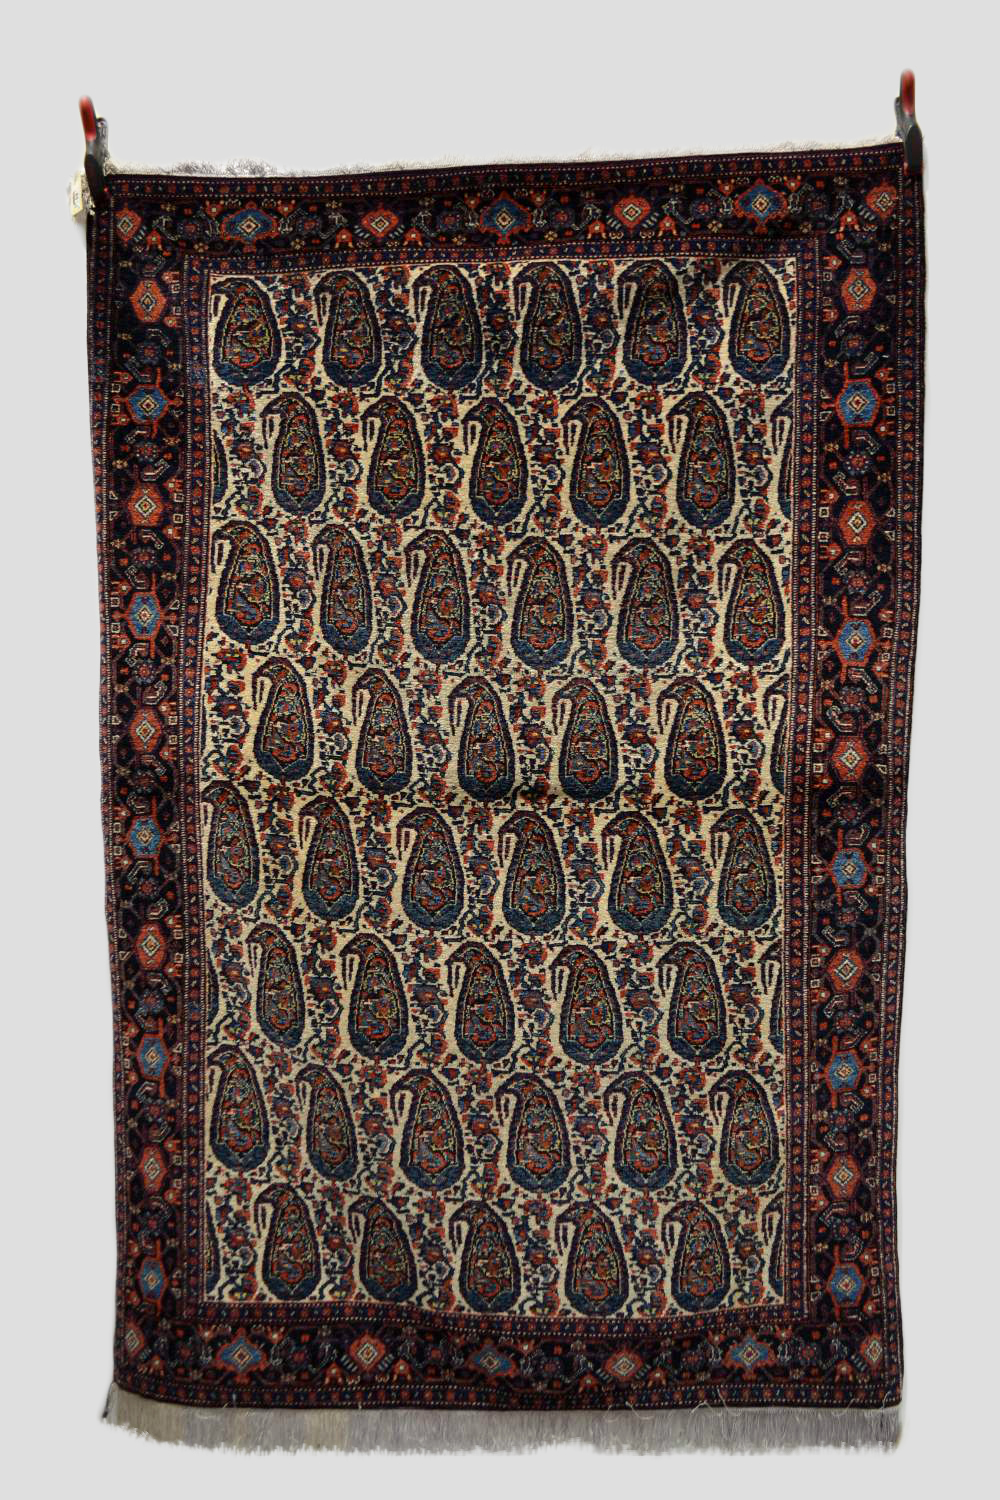 Senneh ivory field 'boteh' rug, wool pile on a silk foundation, Hamadan area, north west Persia,